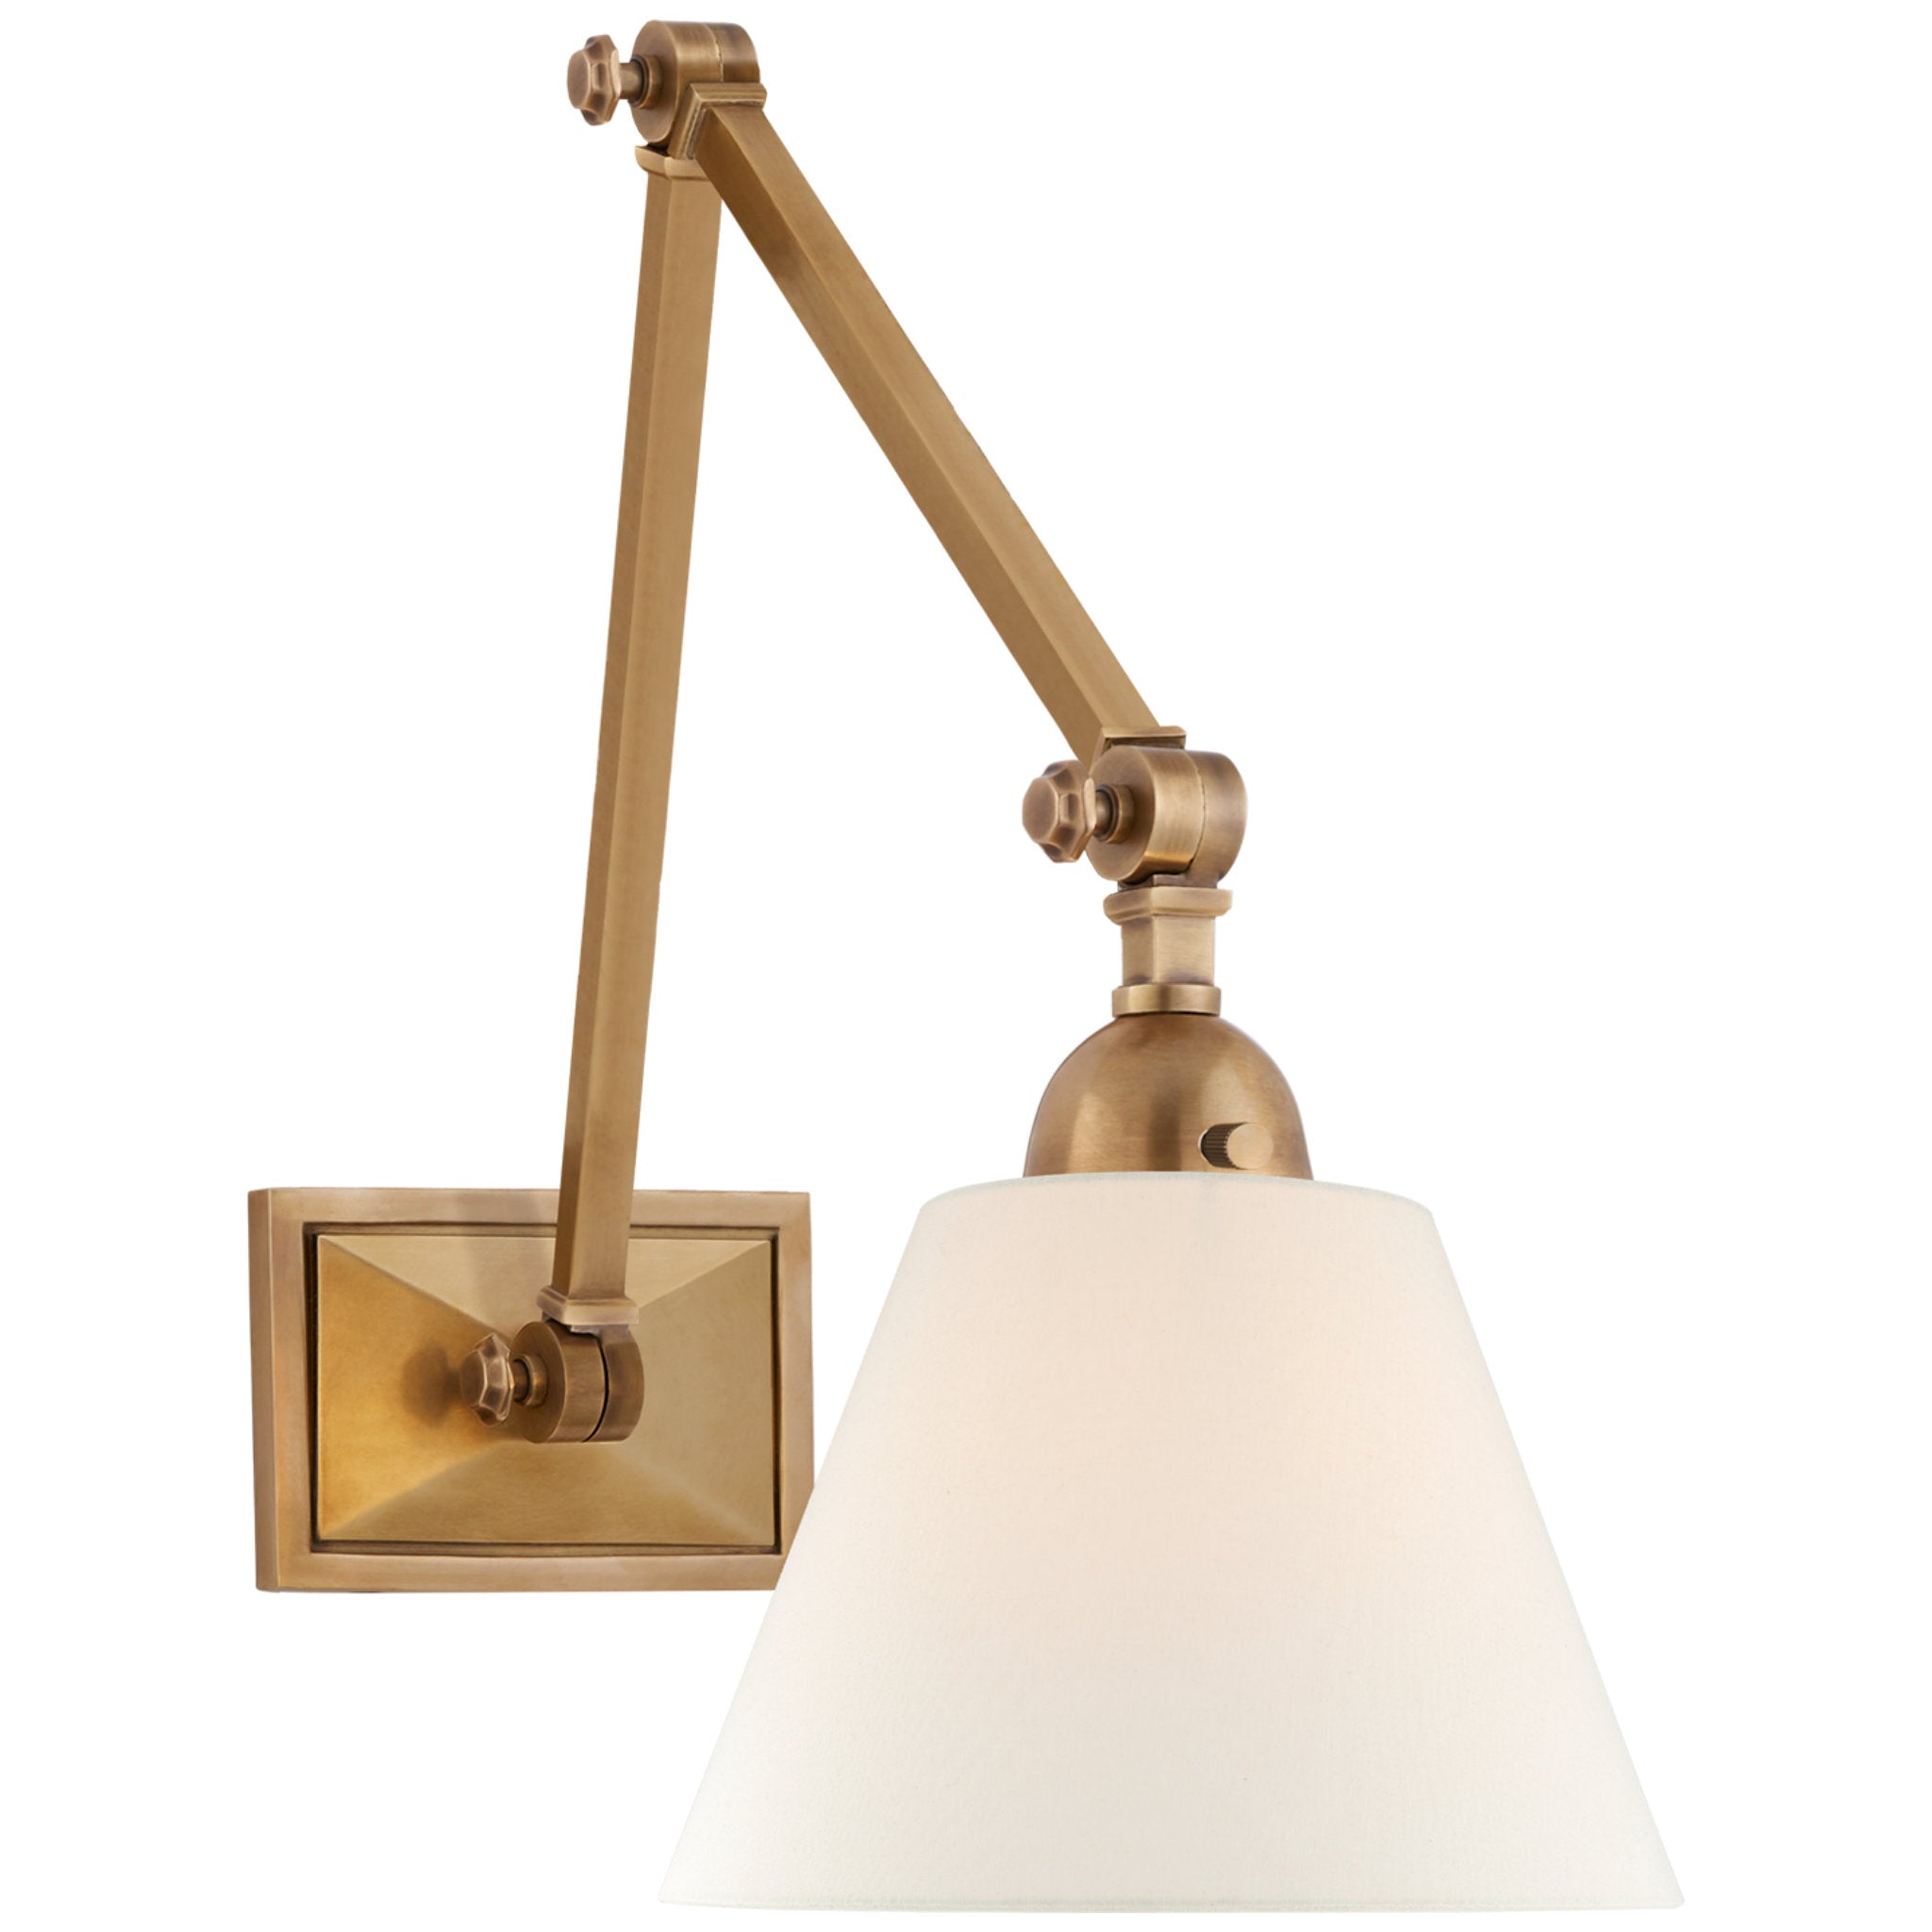 Alexa Hampton Jane Double Library Wall Light in Hand-Rubbed Antique Brass with Linen Shade